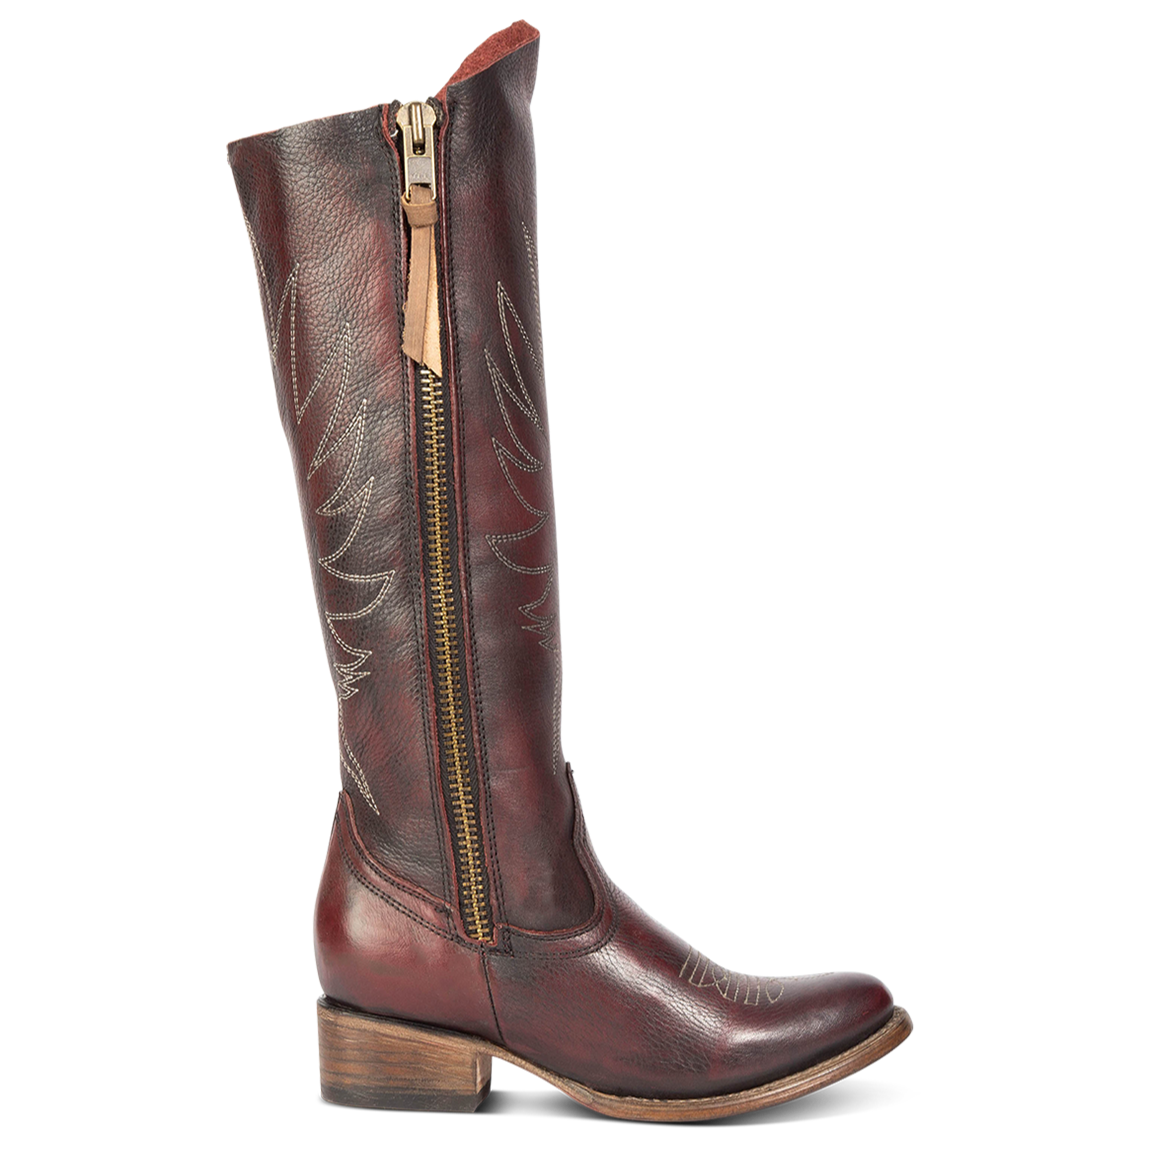 FREEBIRD women's Whisper wine boot with western shaft stitching and outer zip closure accent